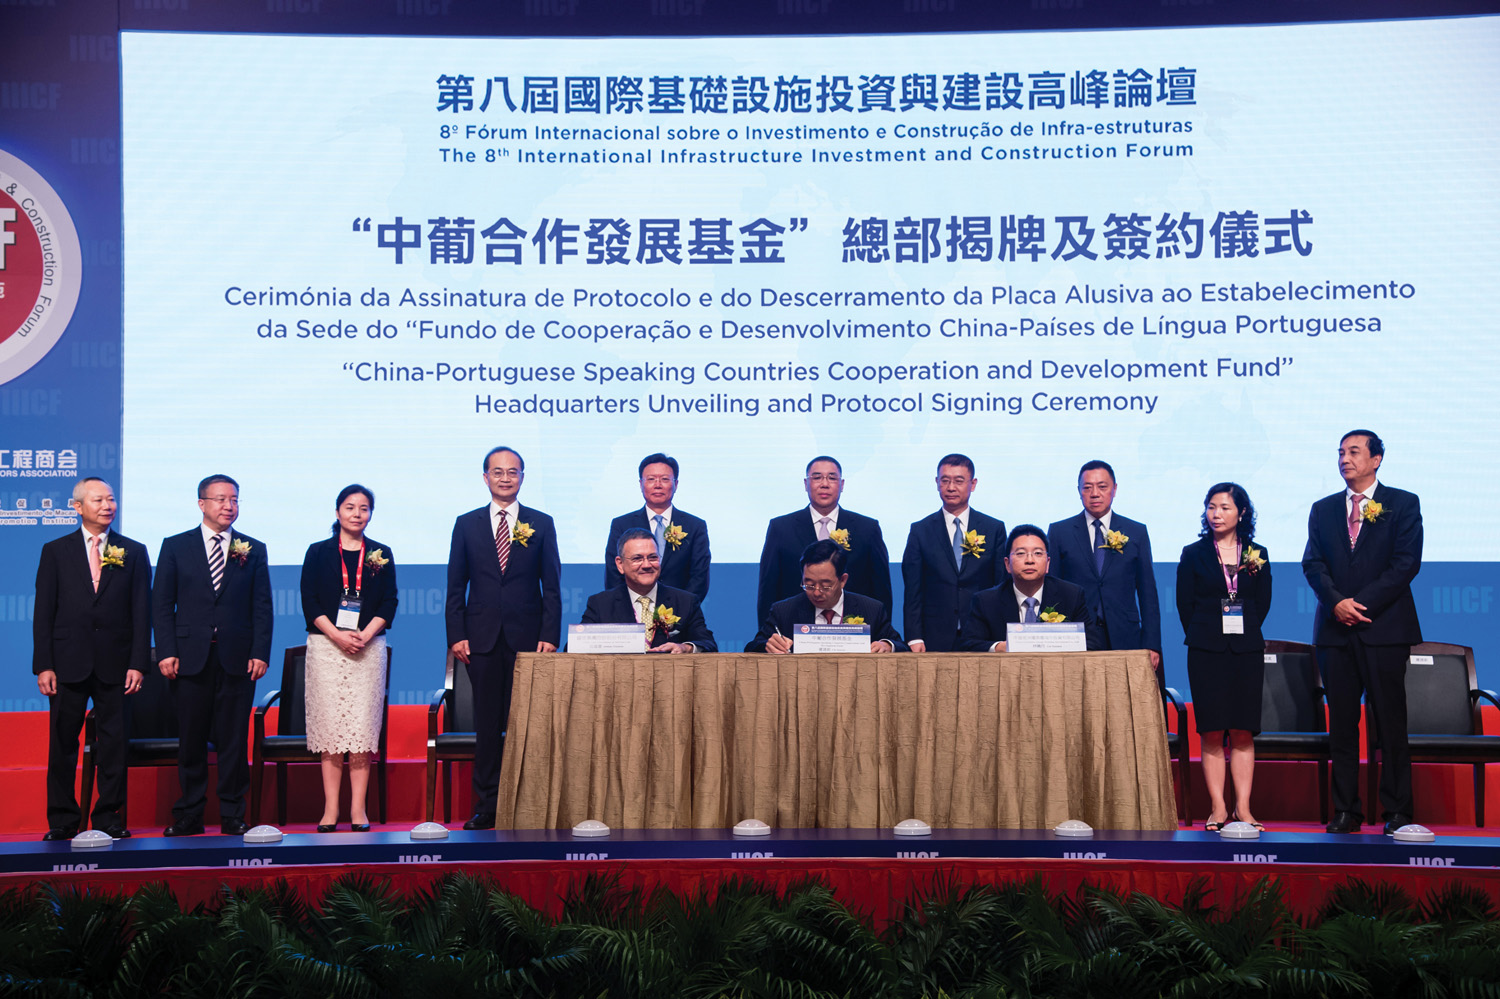 Twenty-four agreements and contracts were signed during the 8th IIICF